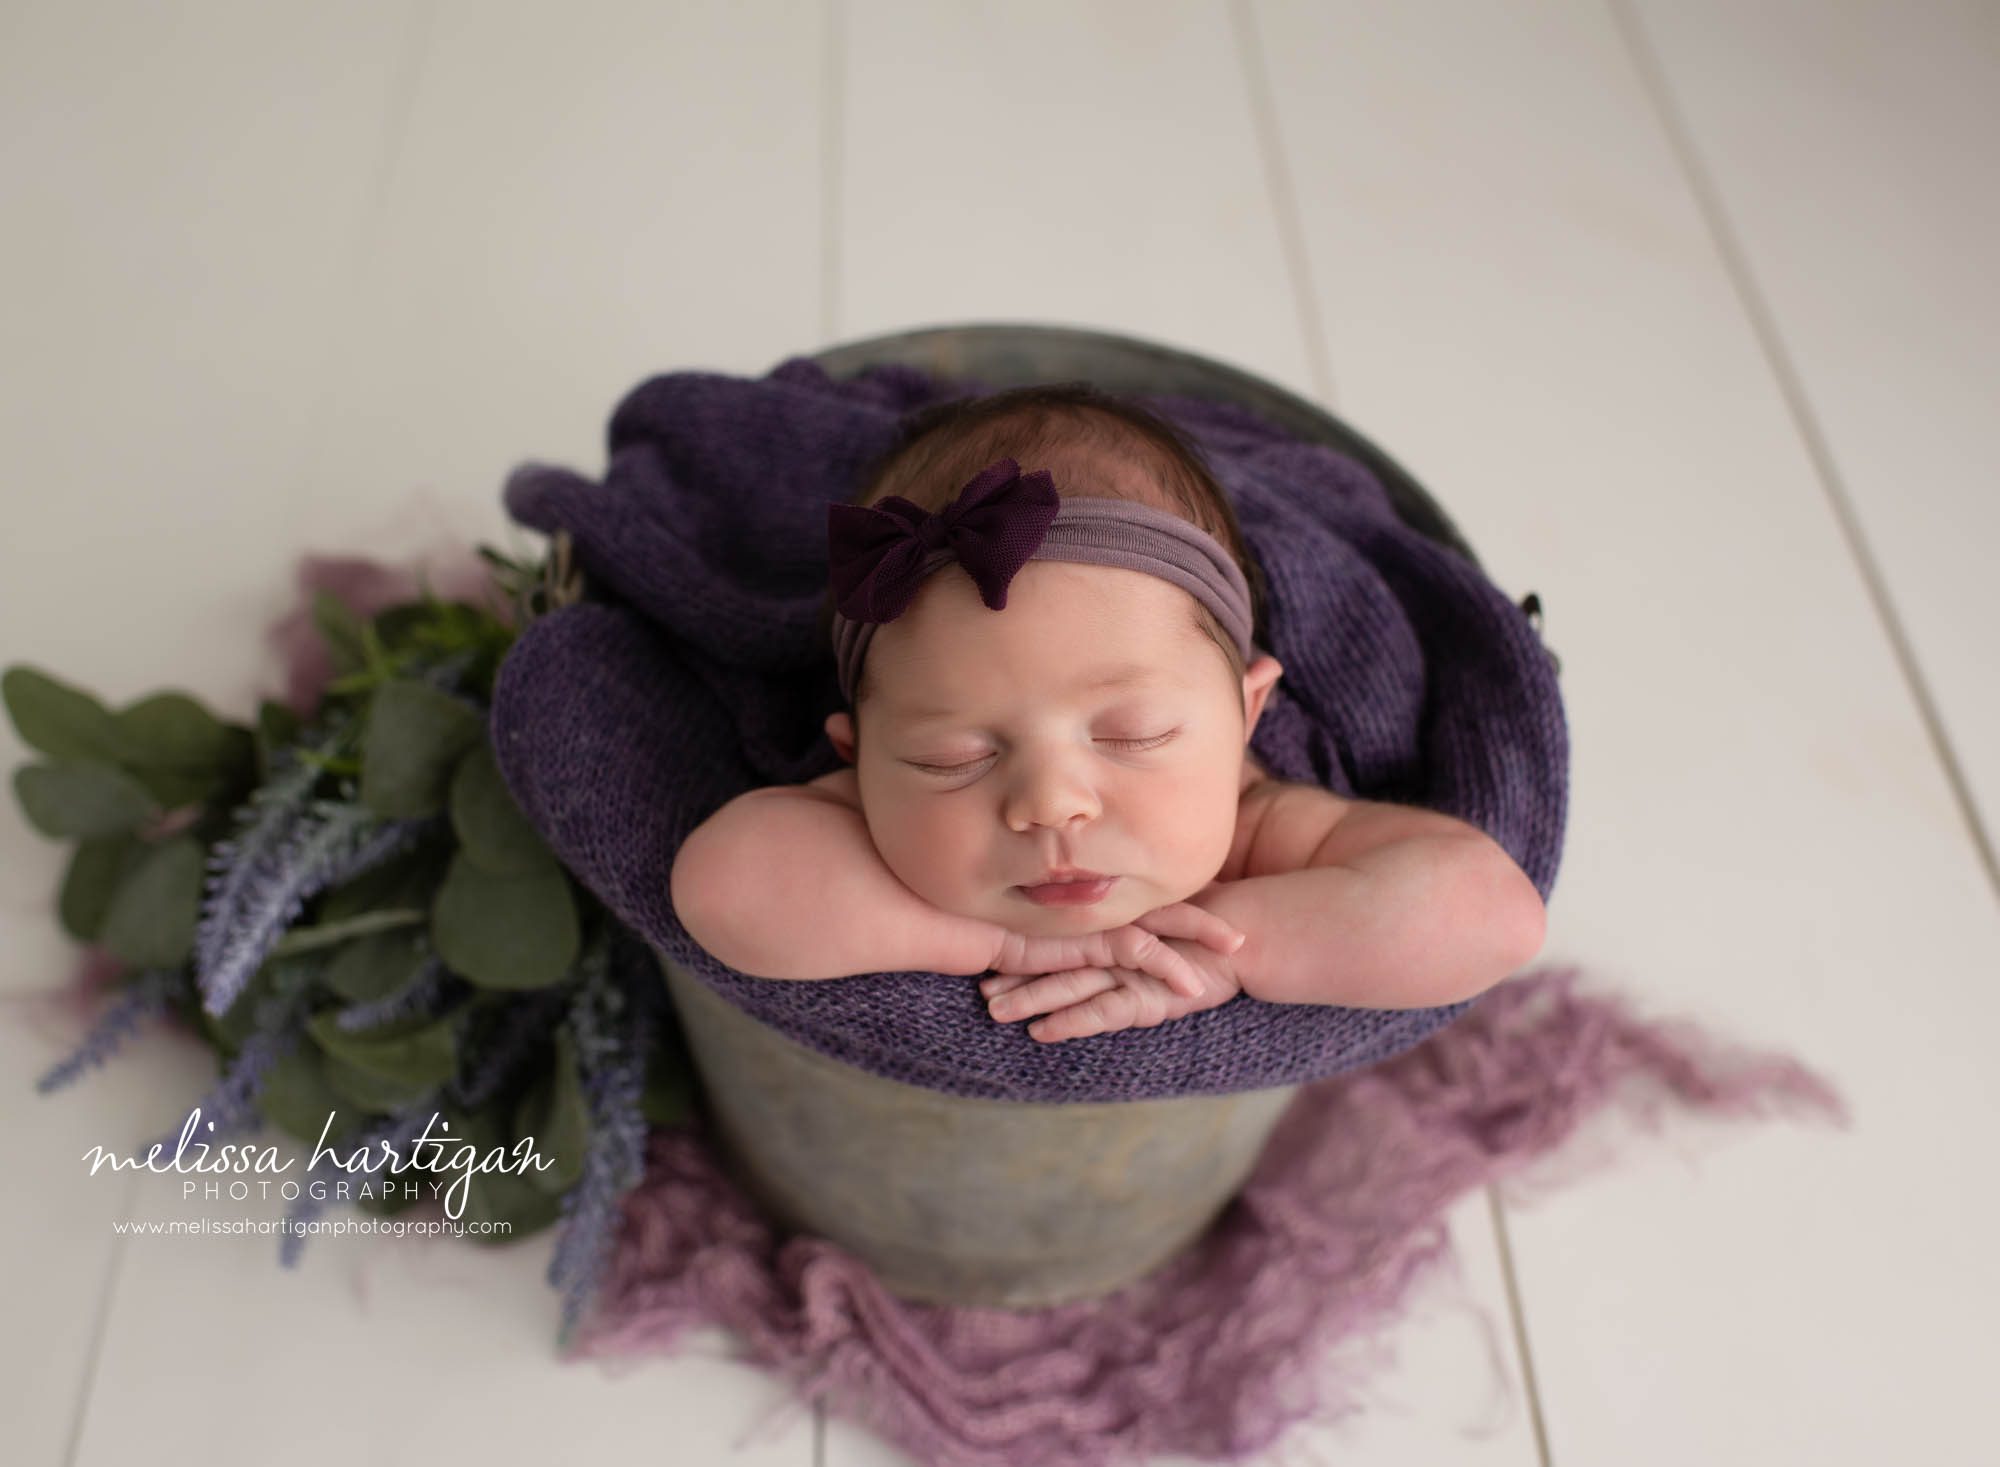 baby girl posed in metal bucket with purple knitted layer and bow headband